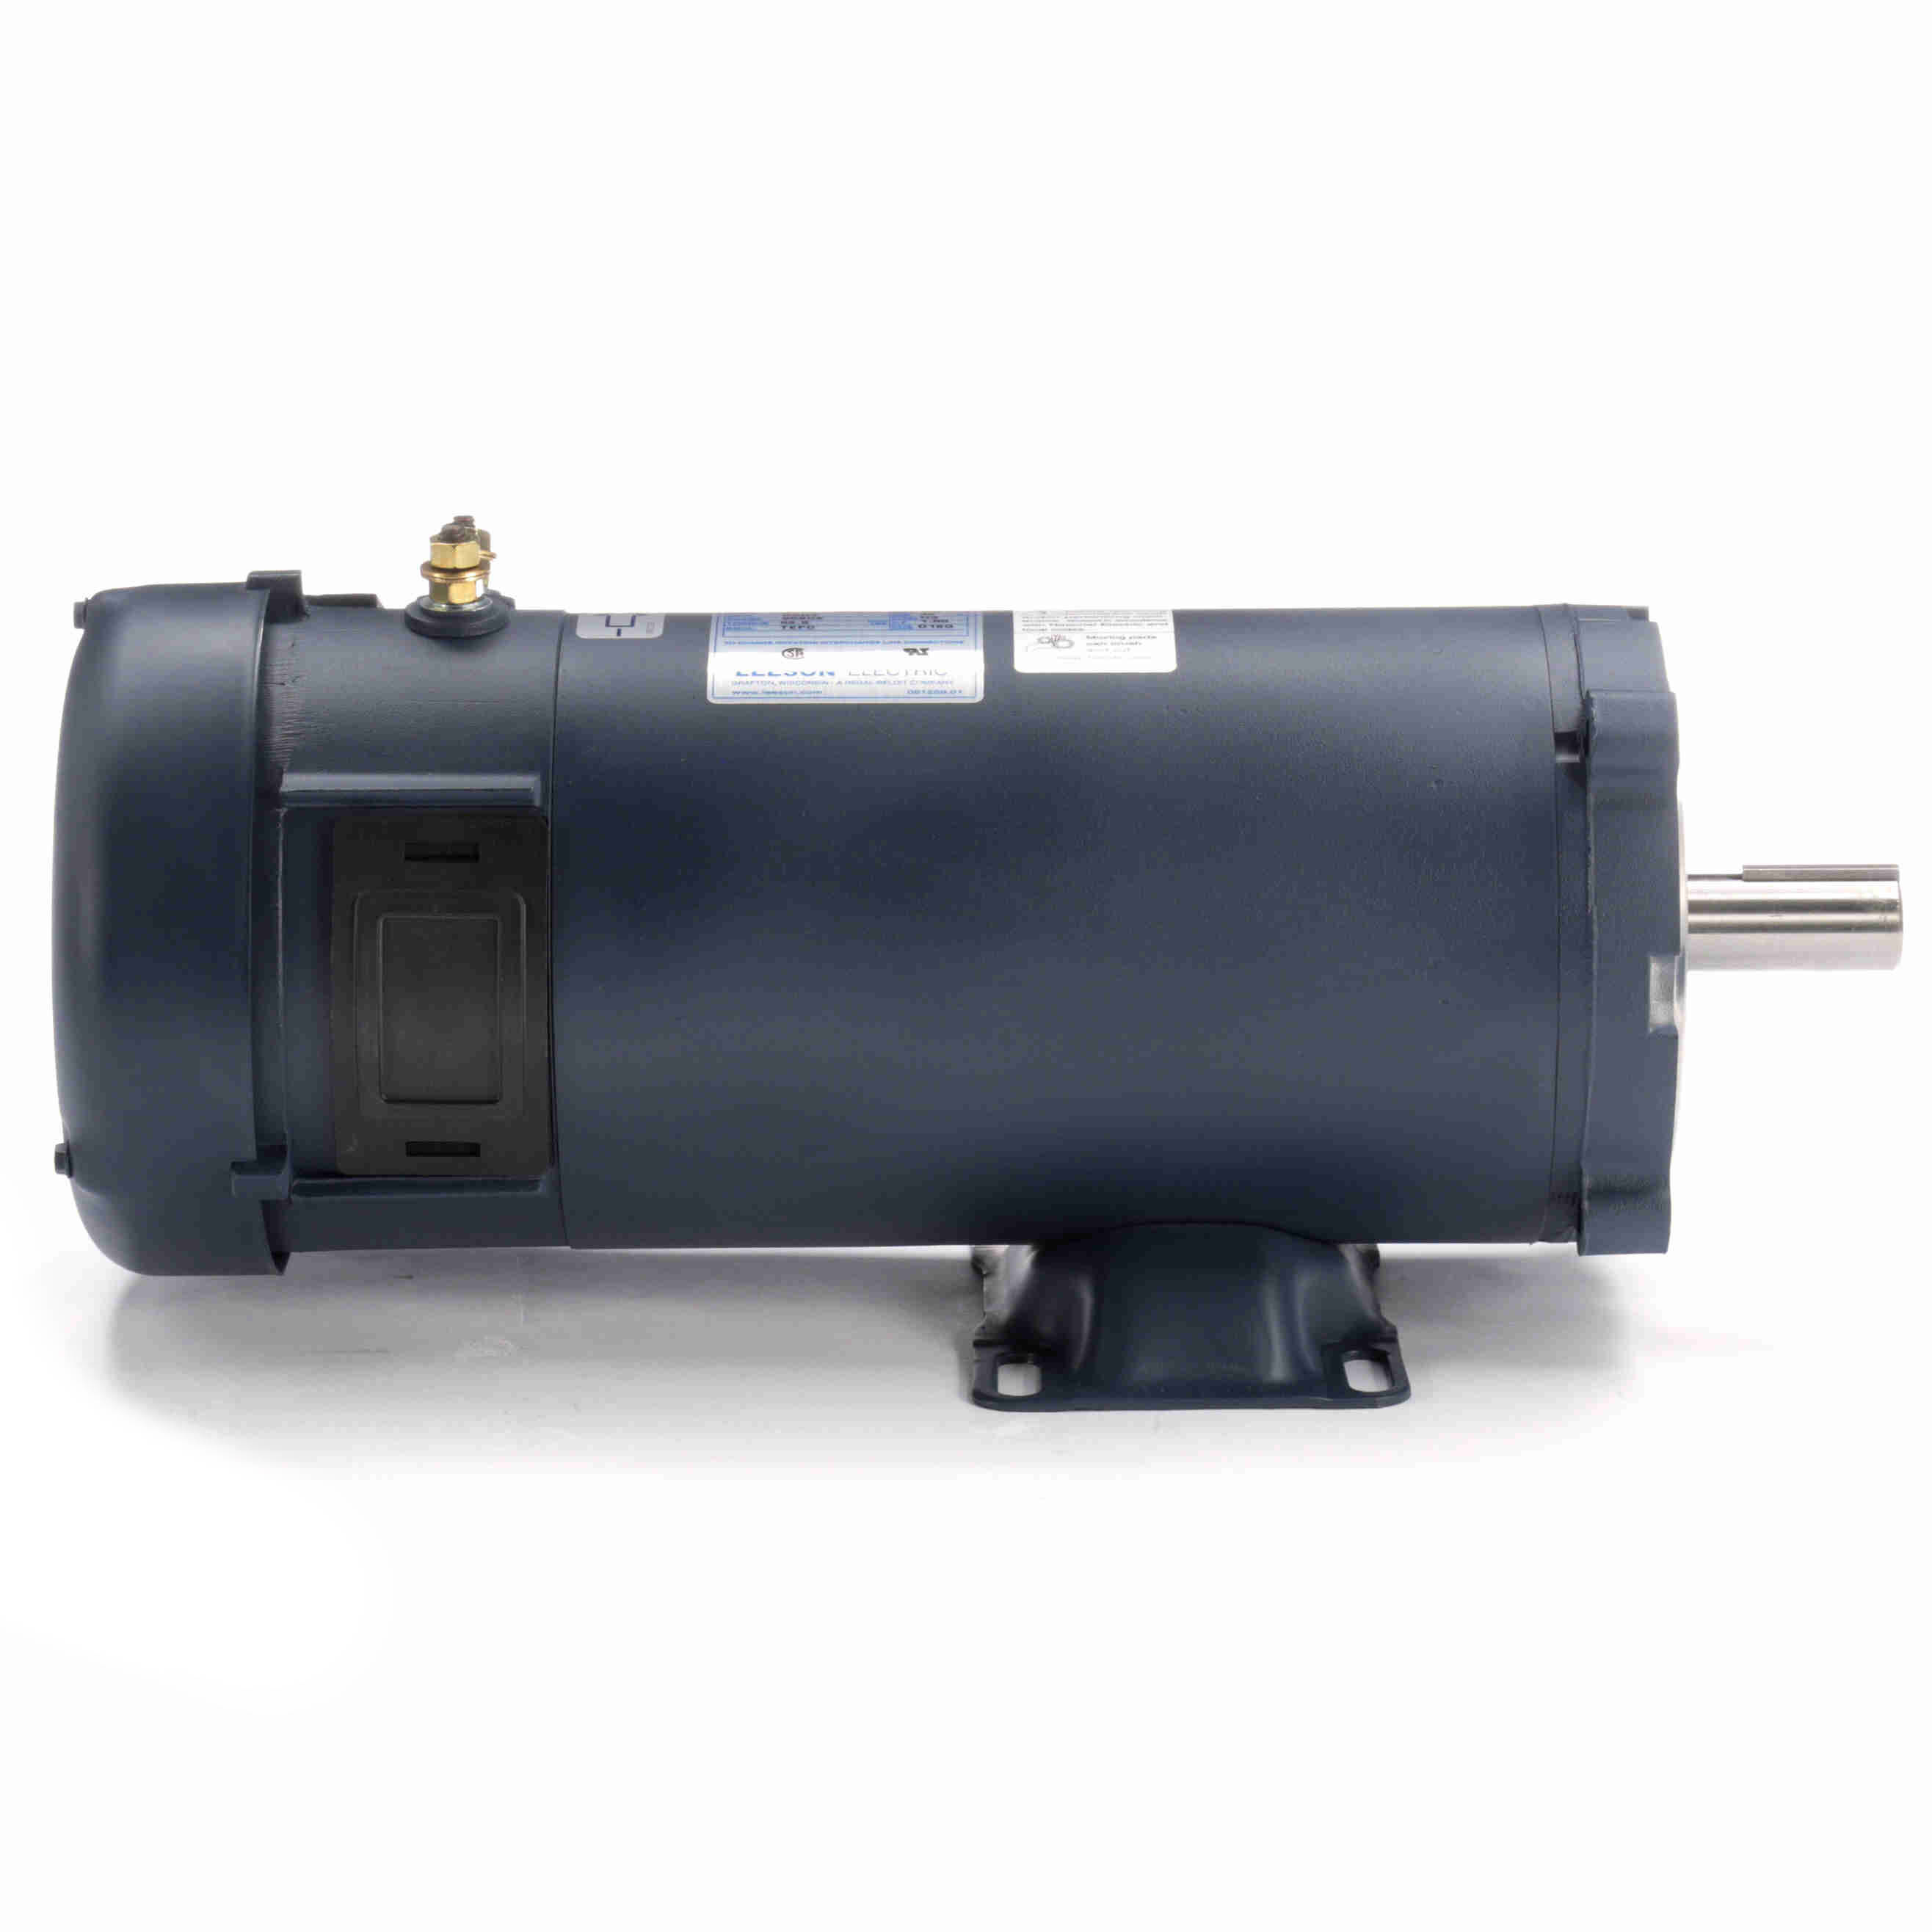 109105.00 Leeson 1.5HP Low Voltage DC Electric Motor, 1800RPM 3